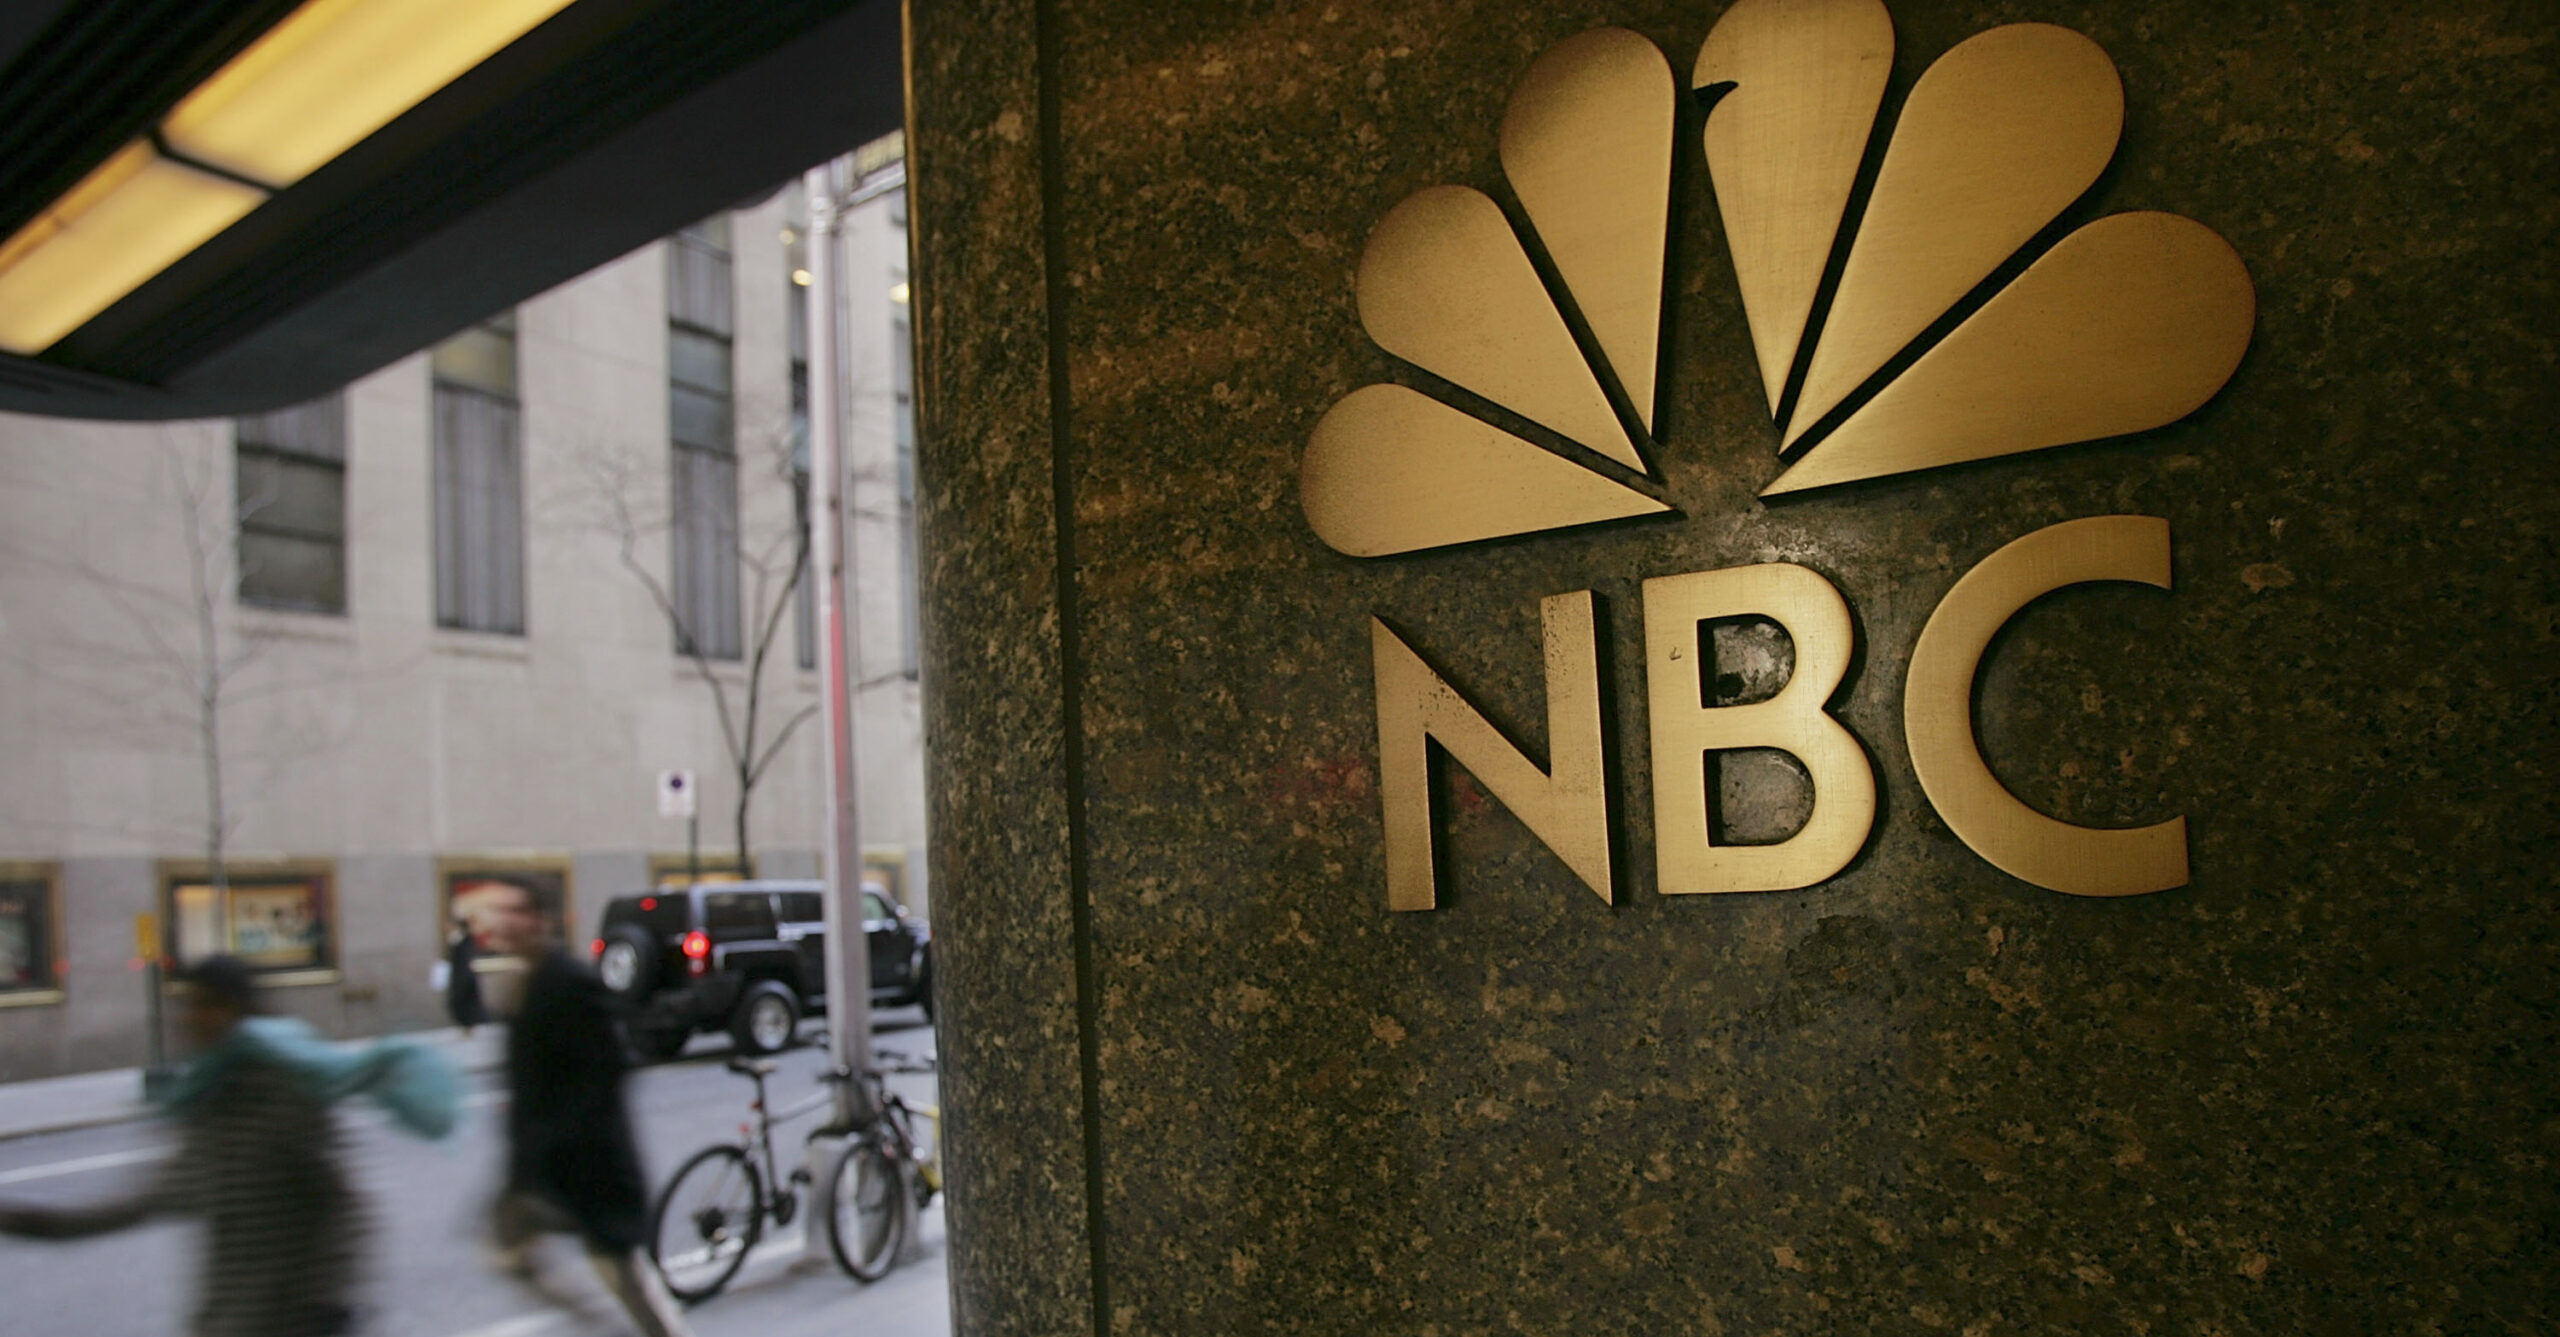 NBC Considers Cutting Off Prime Time Programming After 10 P.M. in the Wake of Committing Billions to College, NFL Football: Report